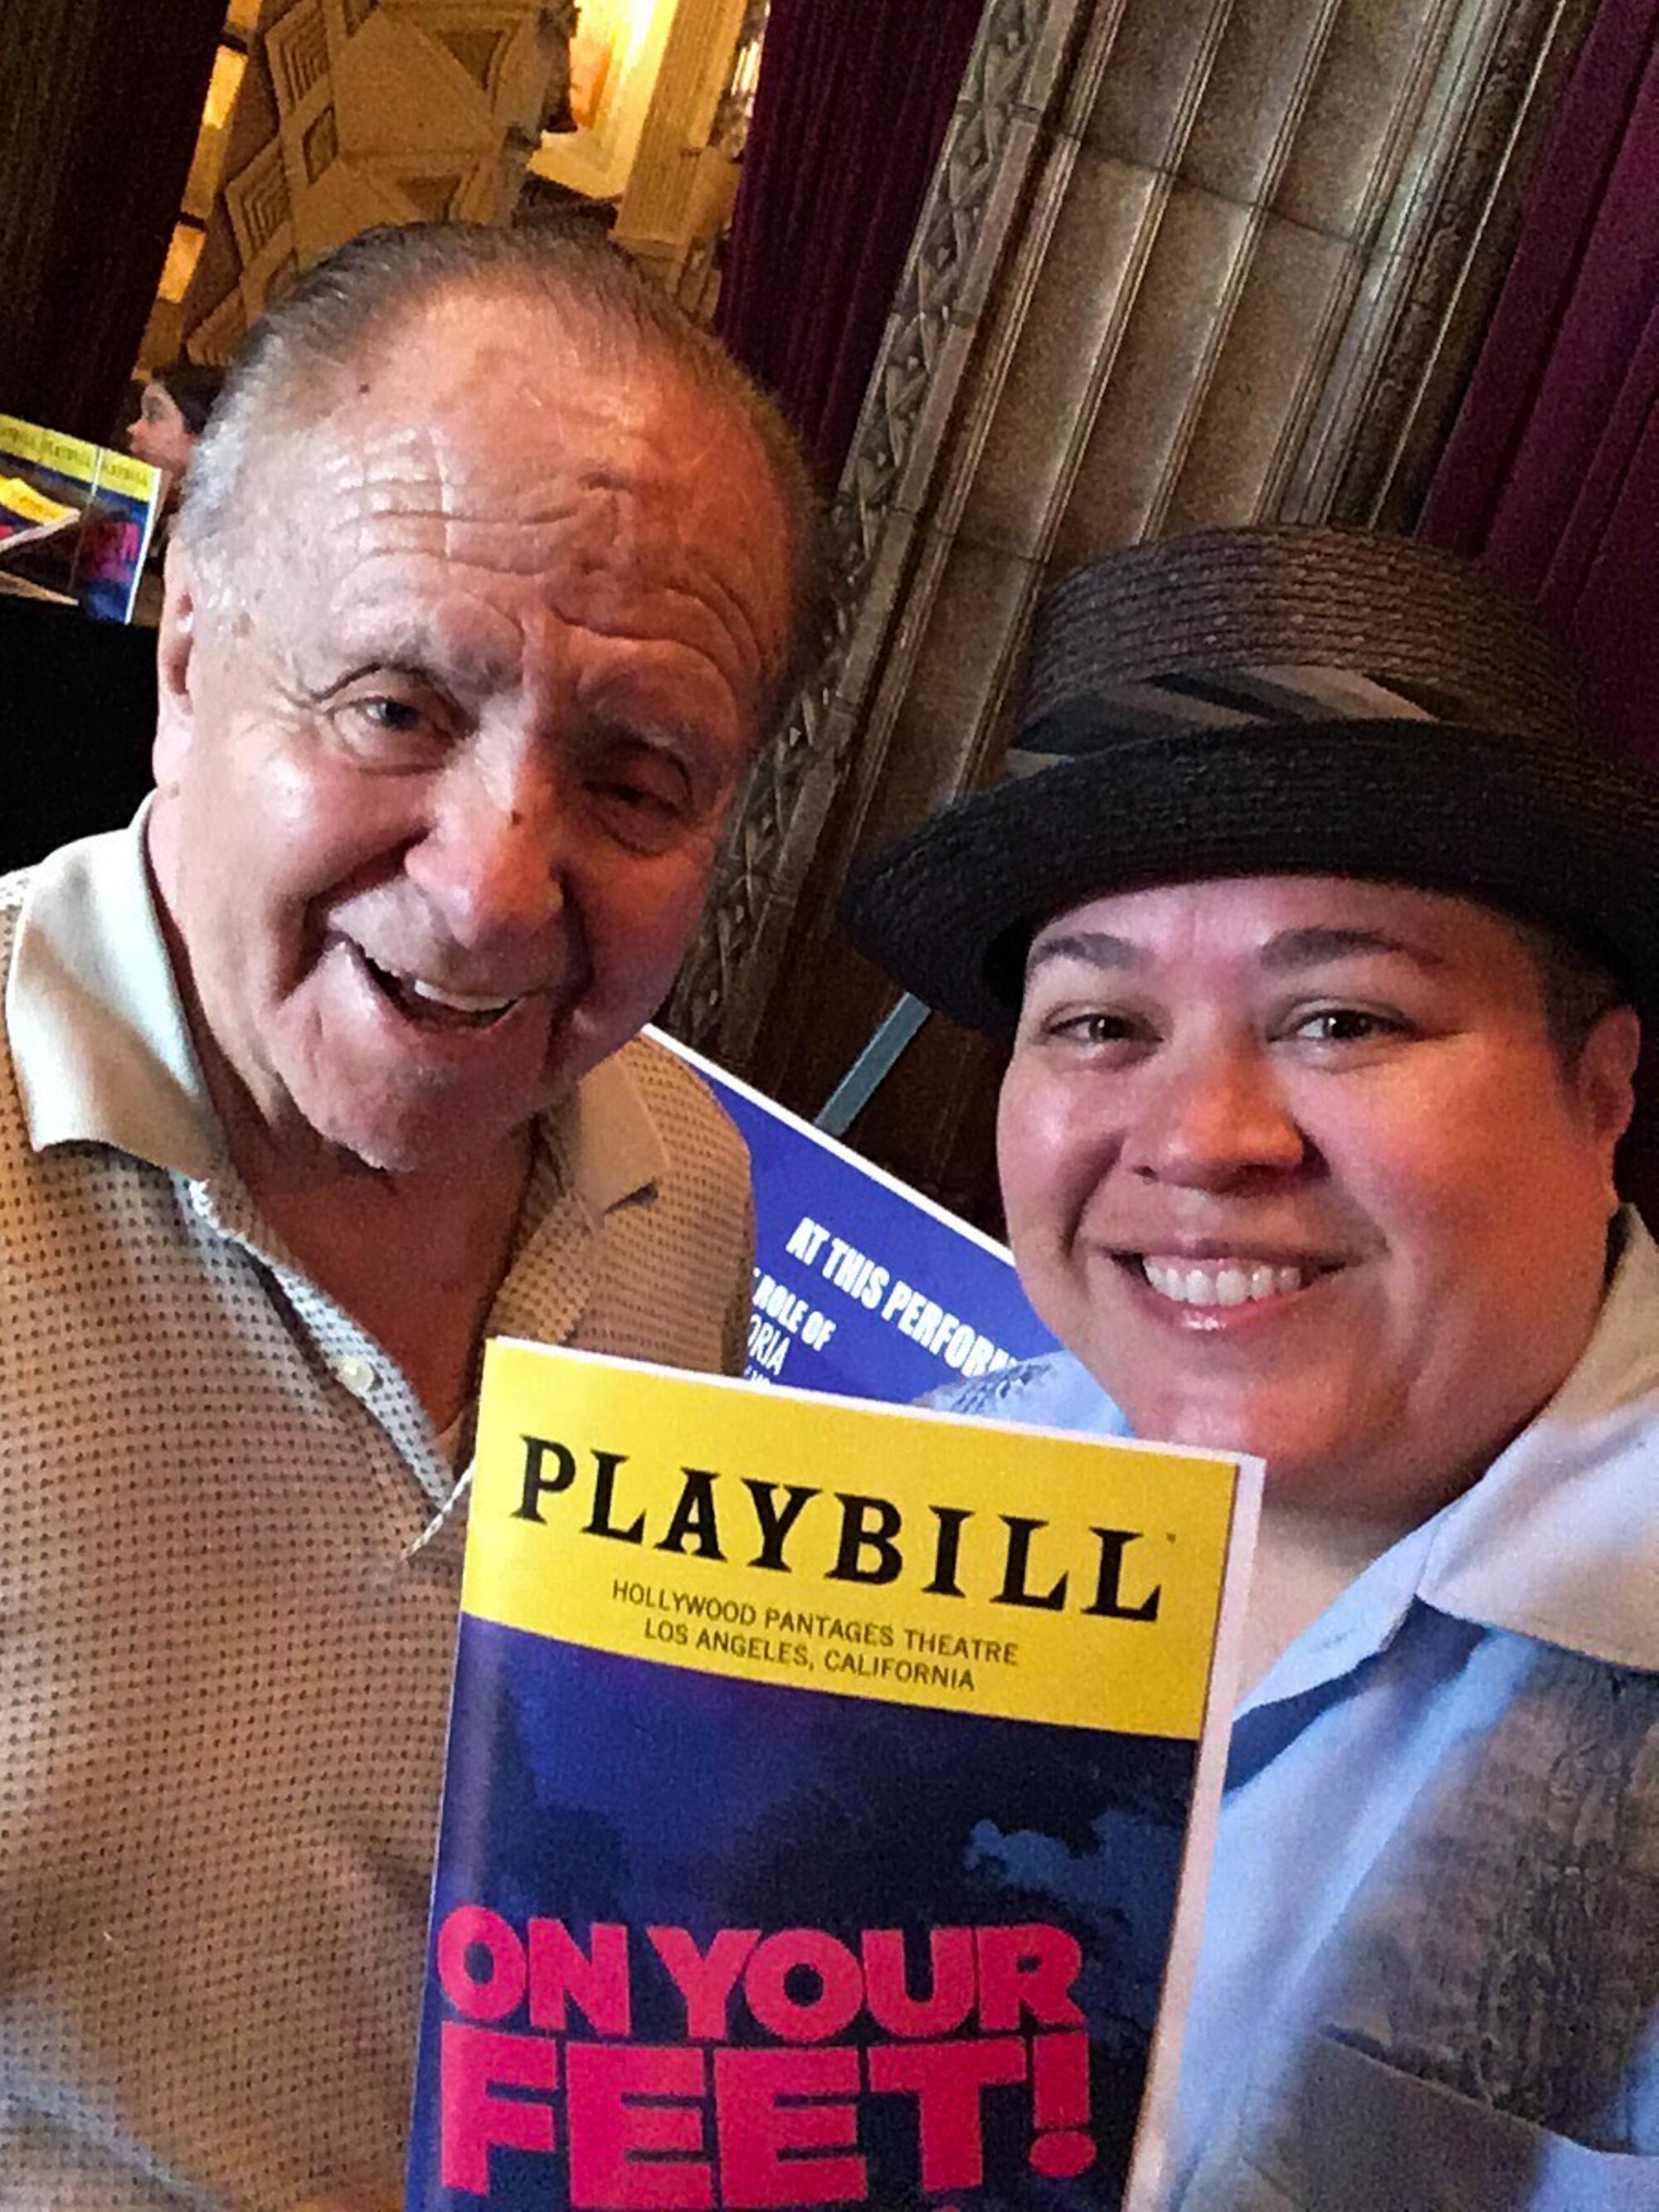 An older man, left, and younger person smiling as they hold up a Playbill for "On Your Feet!"